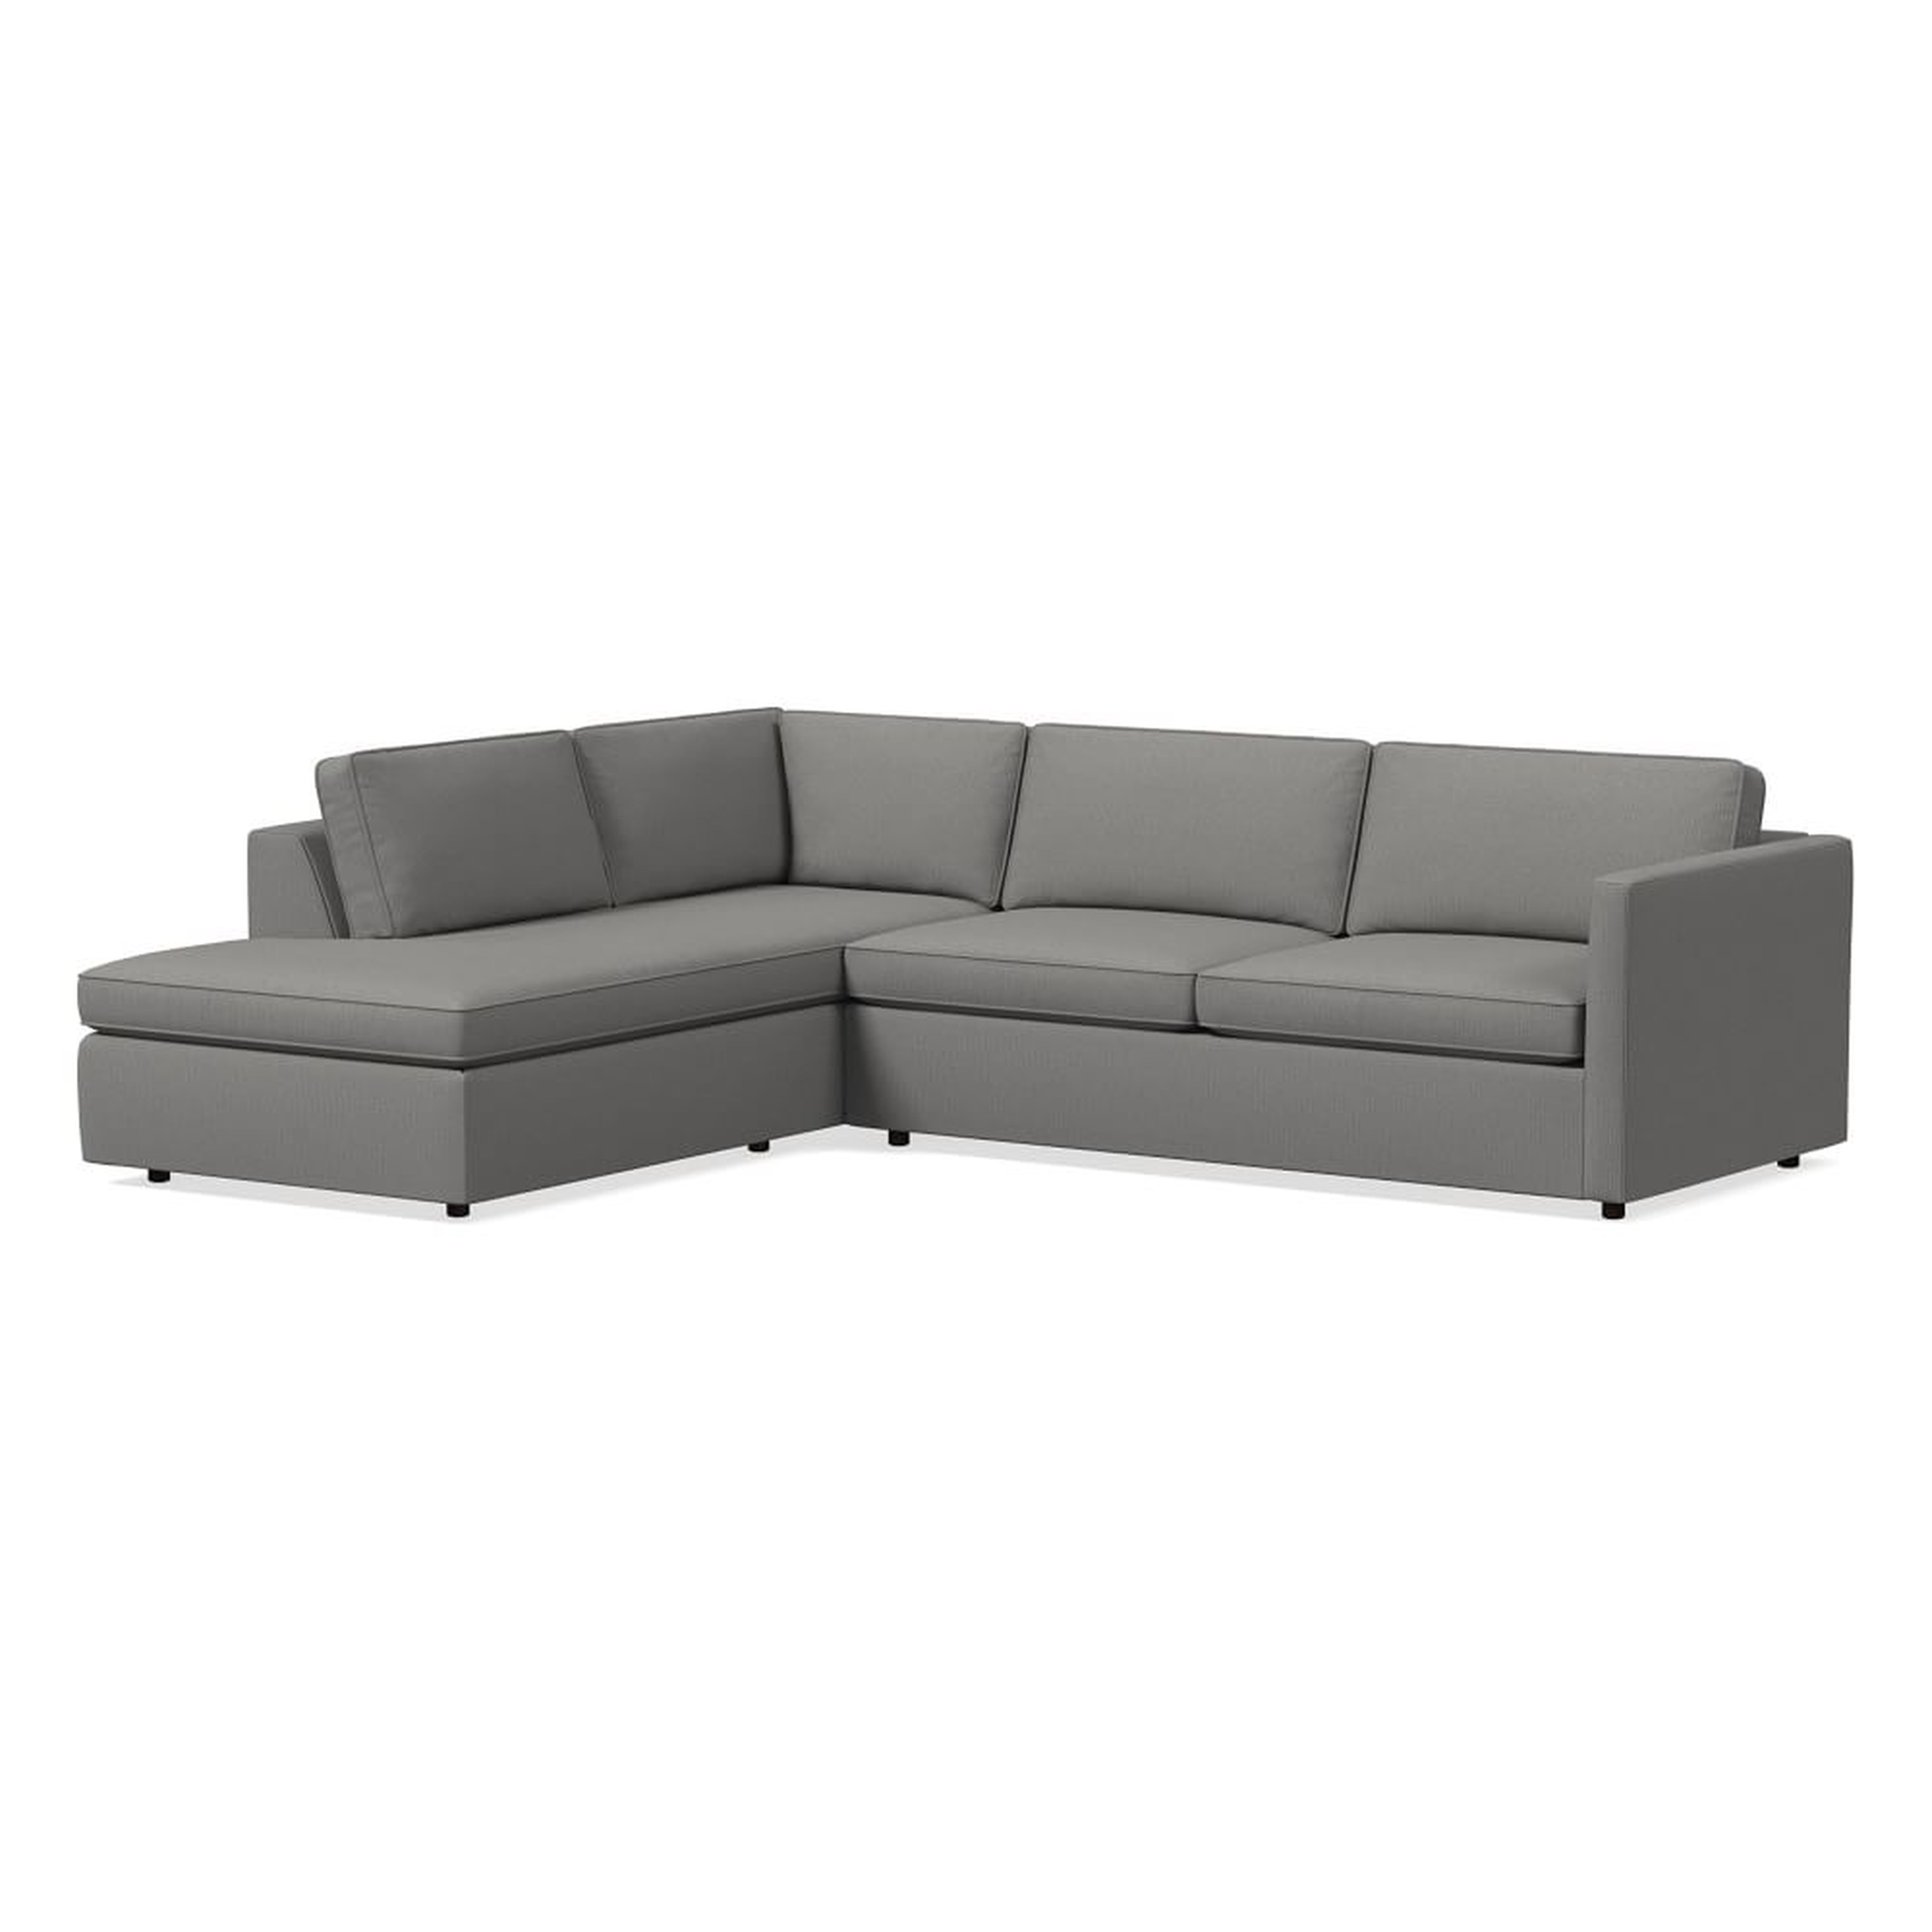 Harris 112" Left Multi-Seat Sleeper Sectional w/ Bumper Chaise, Performance Washed Canvas, Storm Gray - West Elm